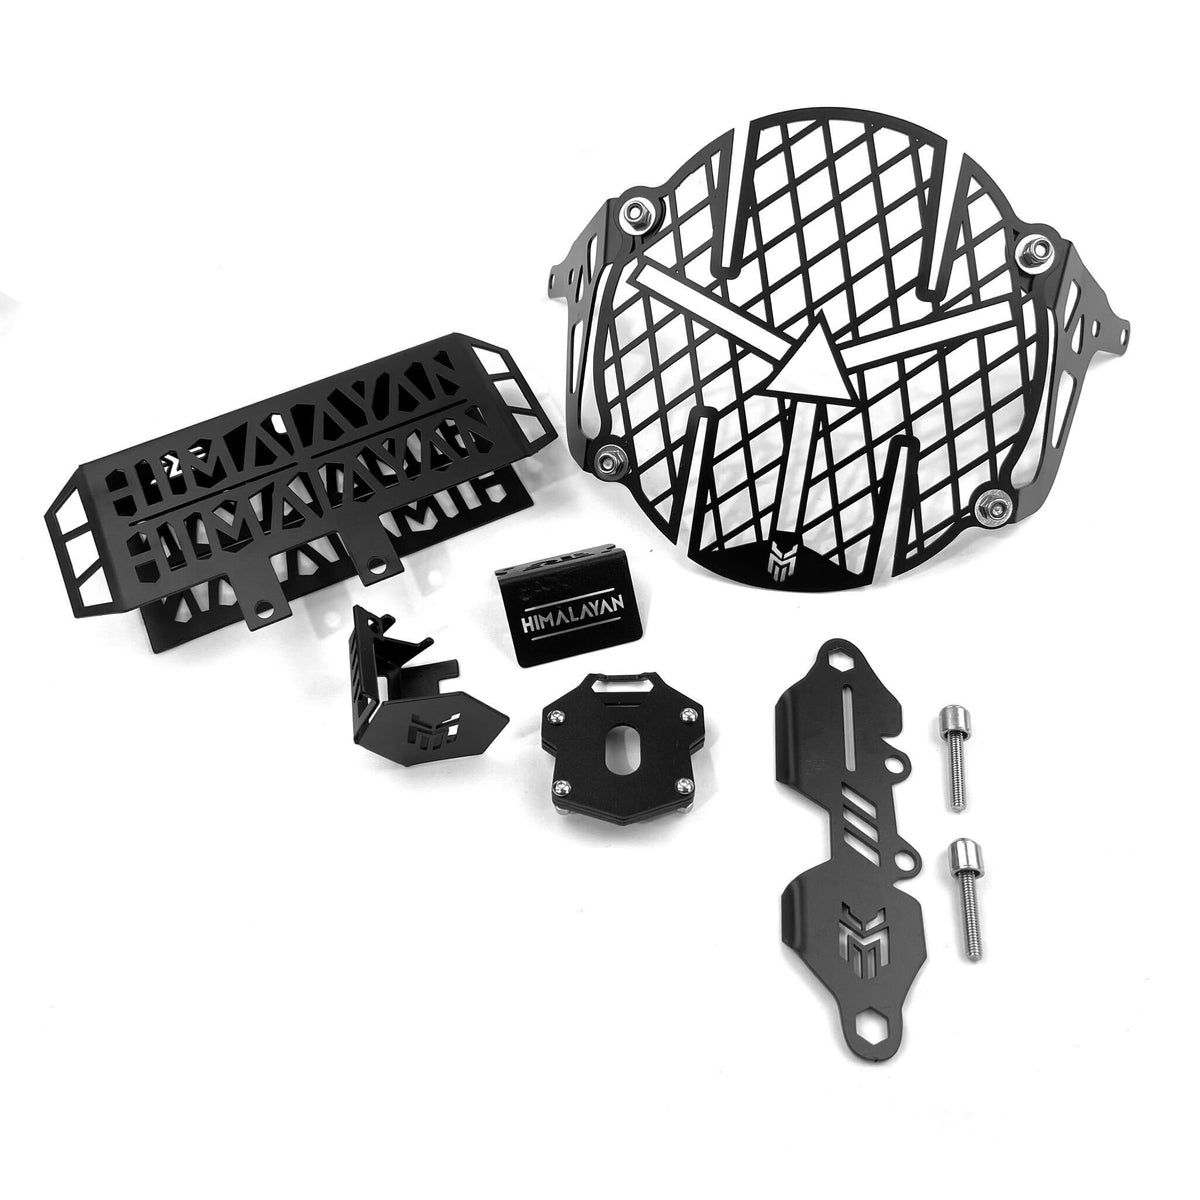 Royal Enfield RE Himalayan BS4 Arrow Headlight, Side Stand Extender, Oil Cooler & Container, Master Cylinder & Reservoir Guard